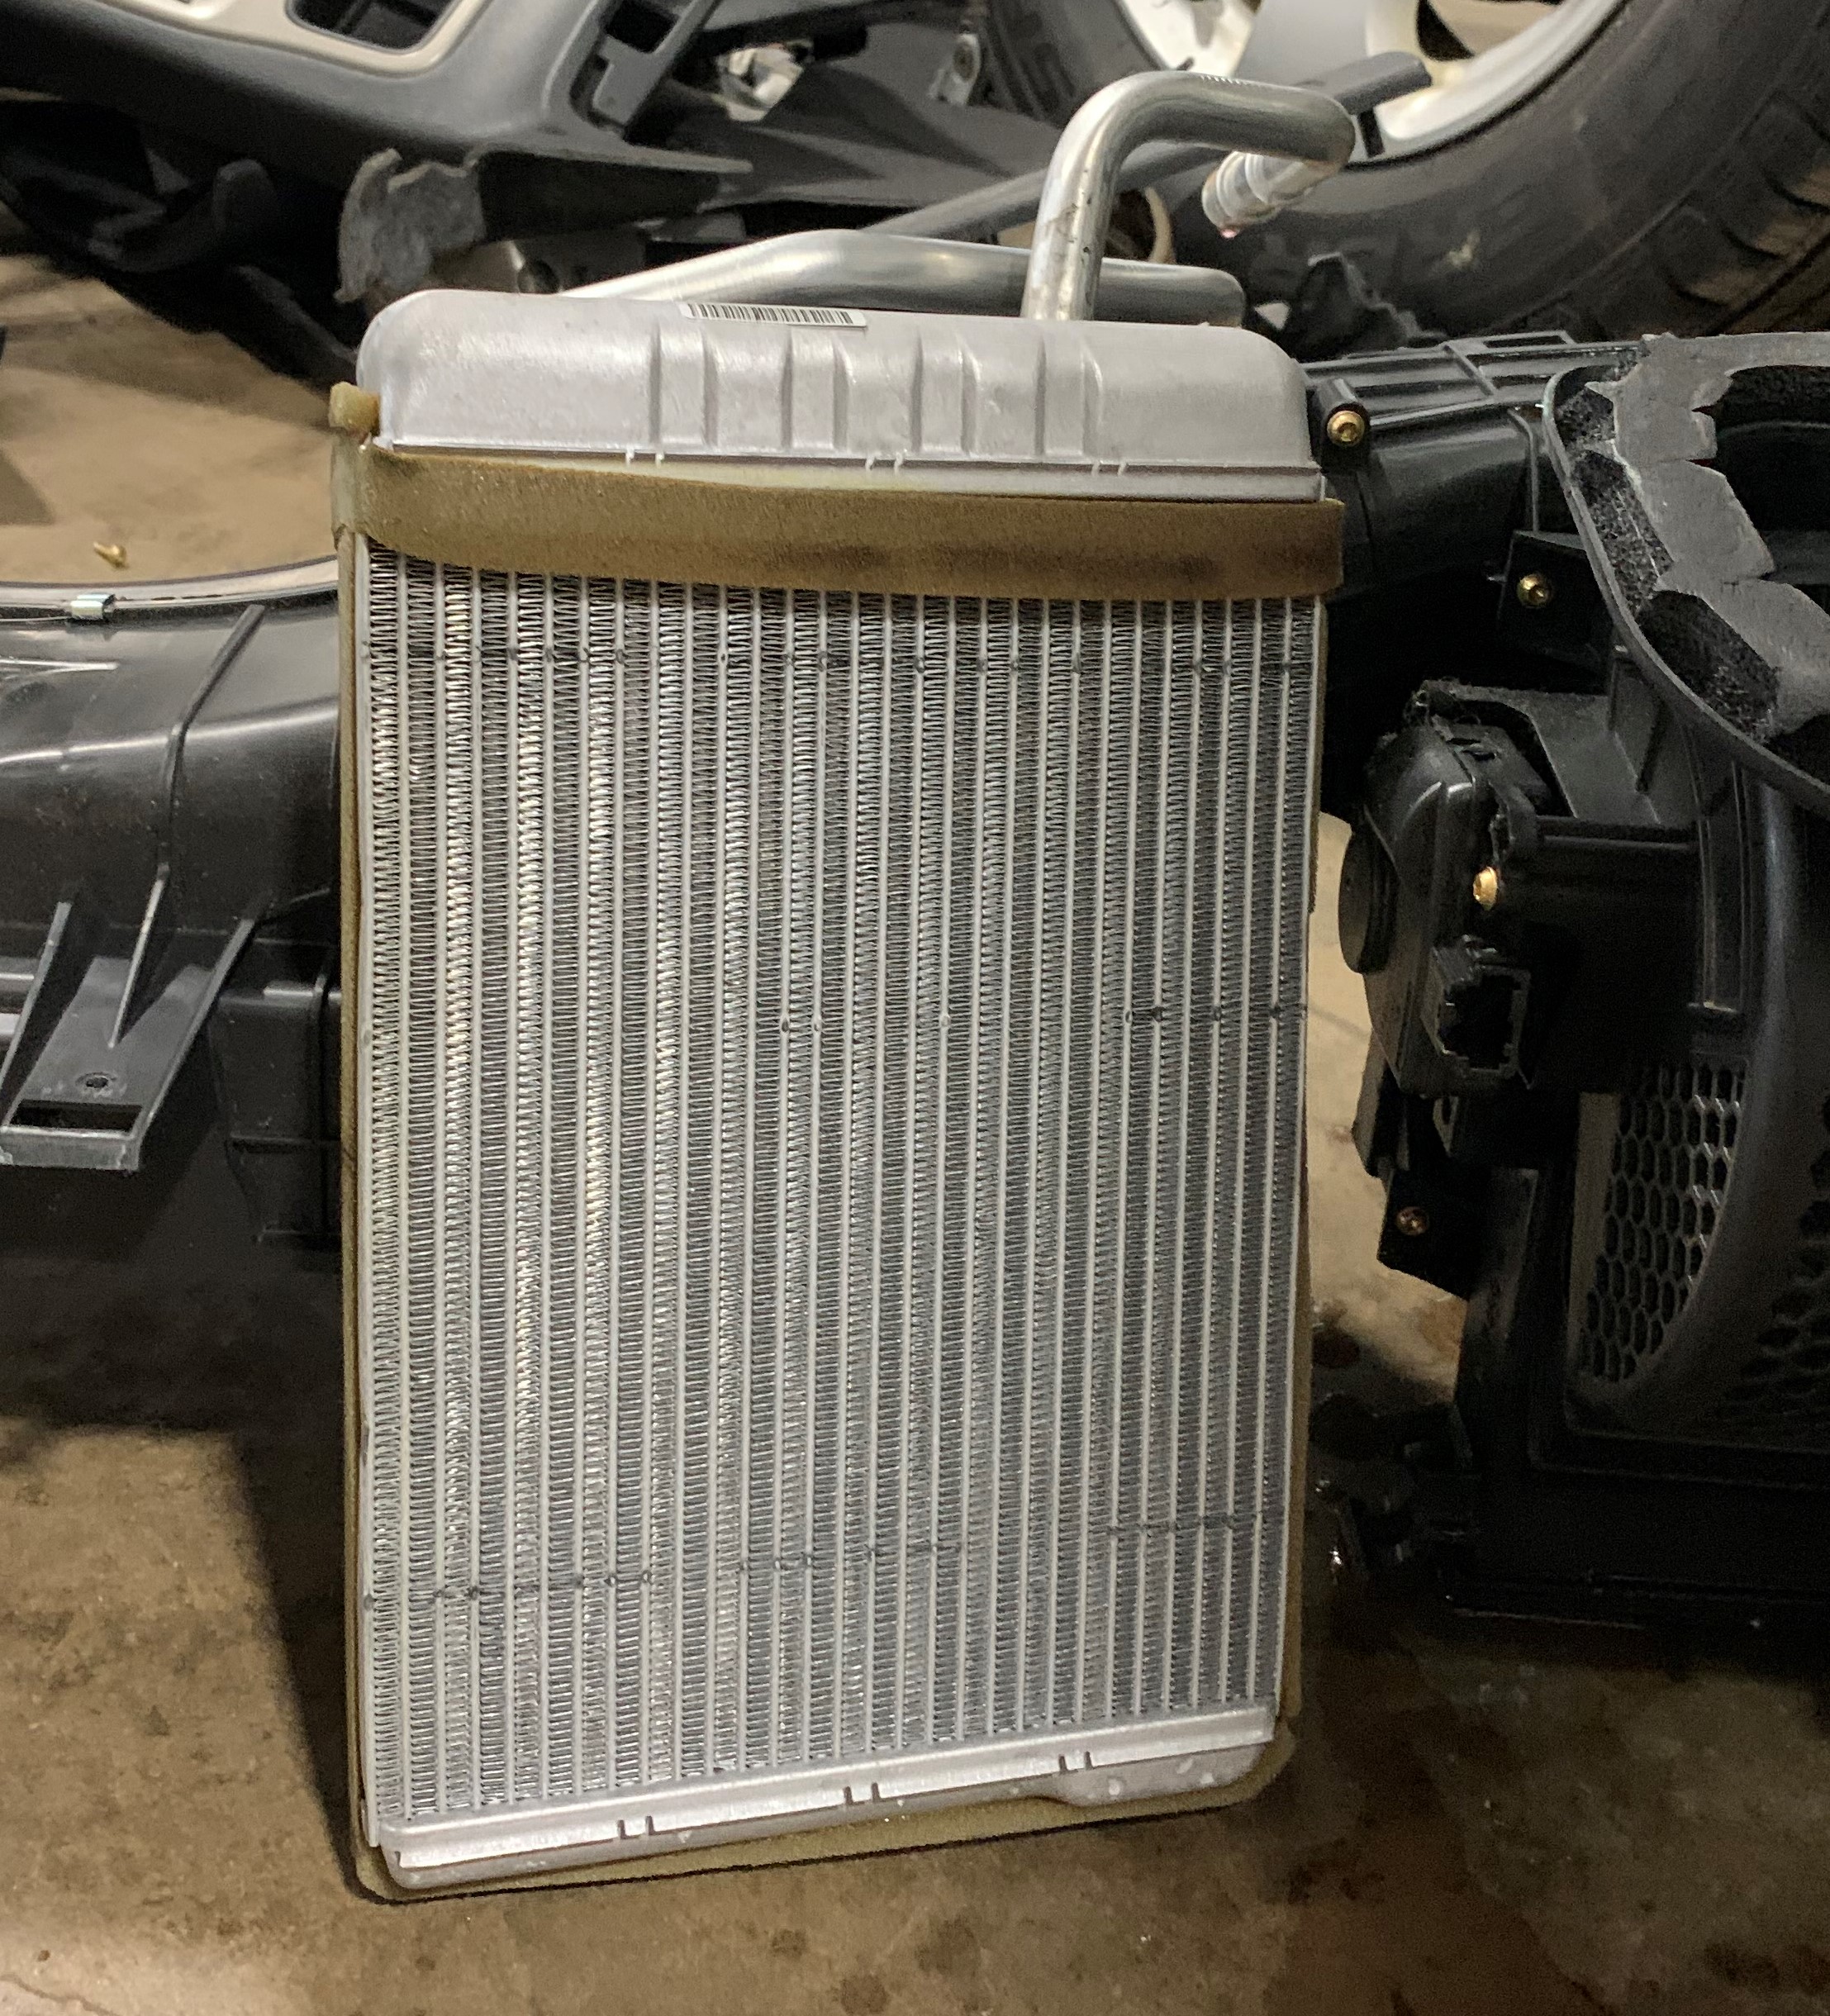 Why Is My Car Heater Blowing Cold Air? - Lou's Car Care & Fleet Services